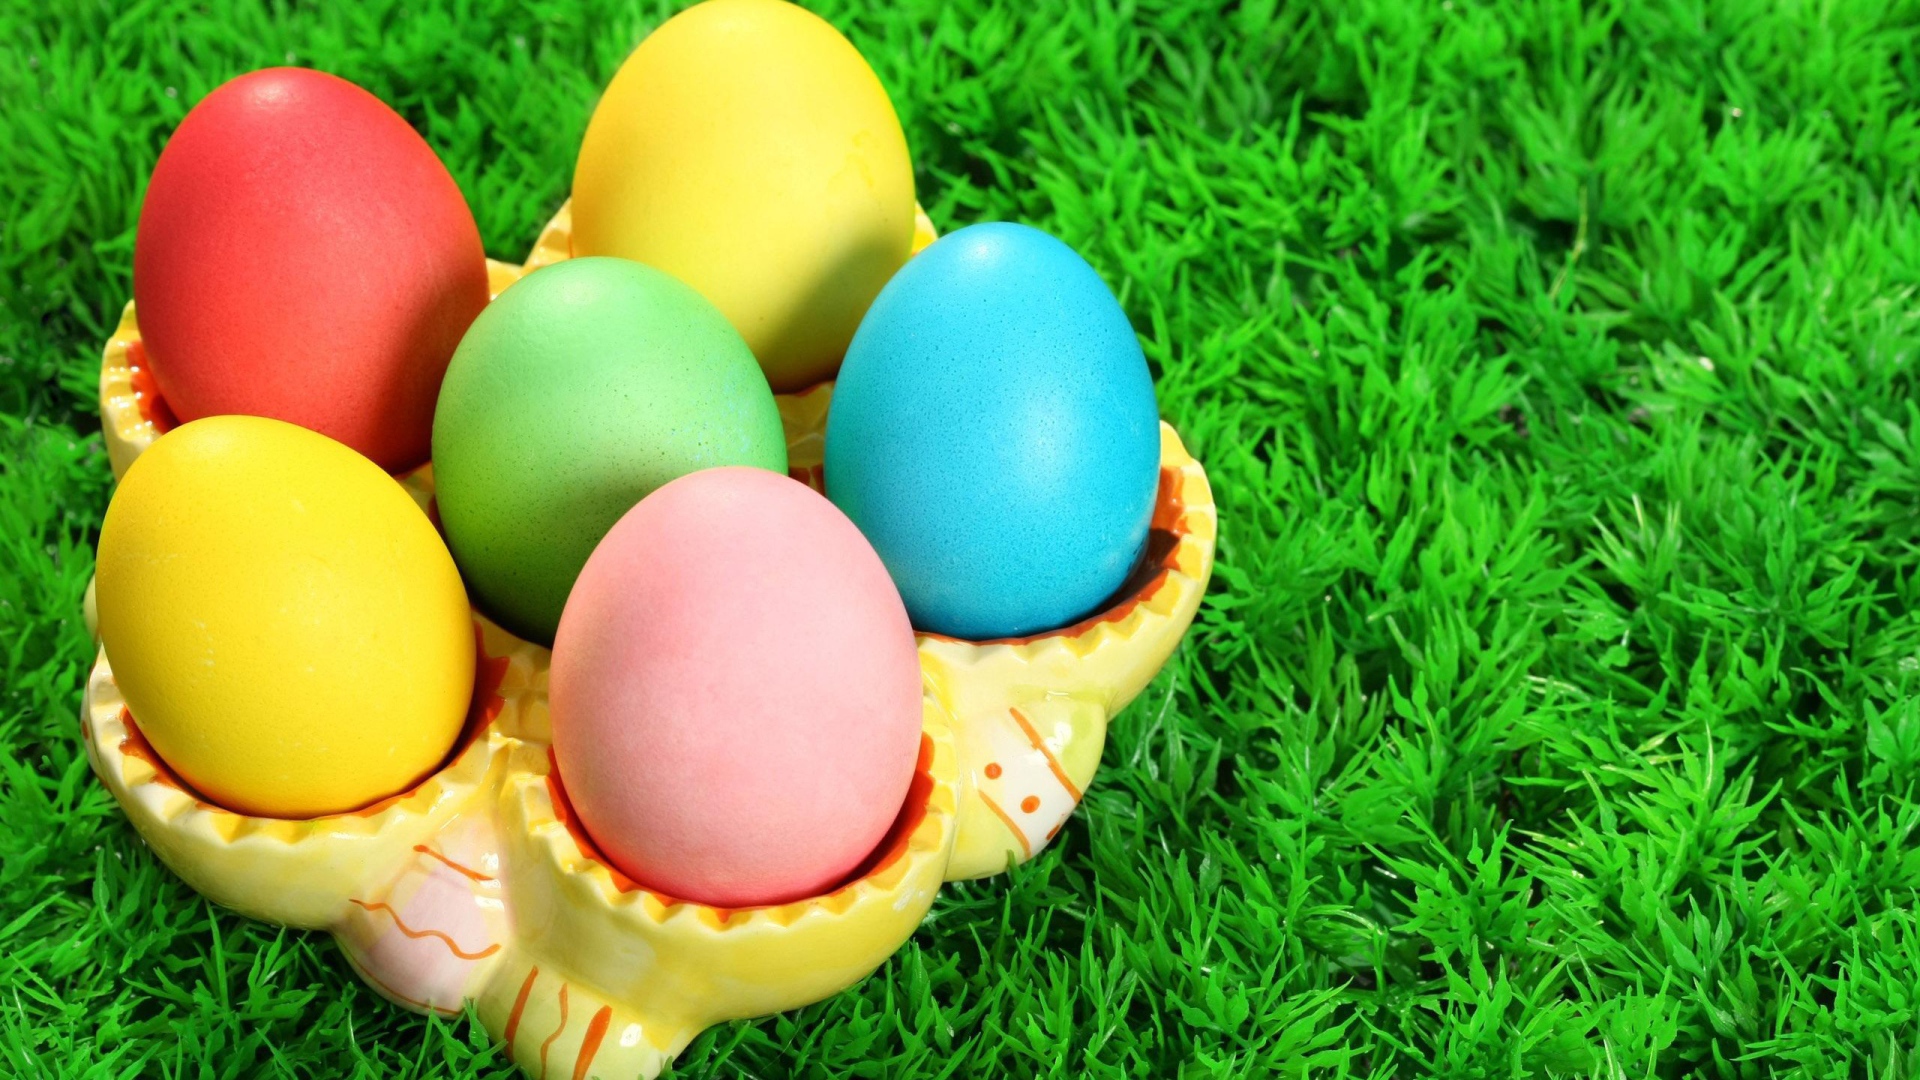 Colorful eggs on grass for Easter